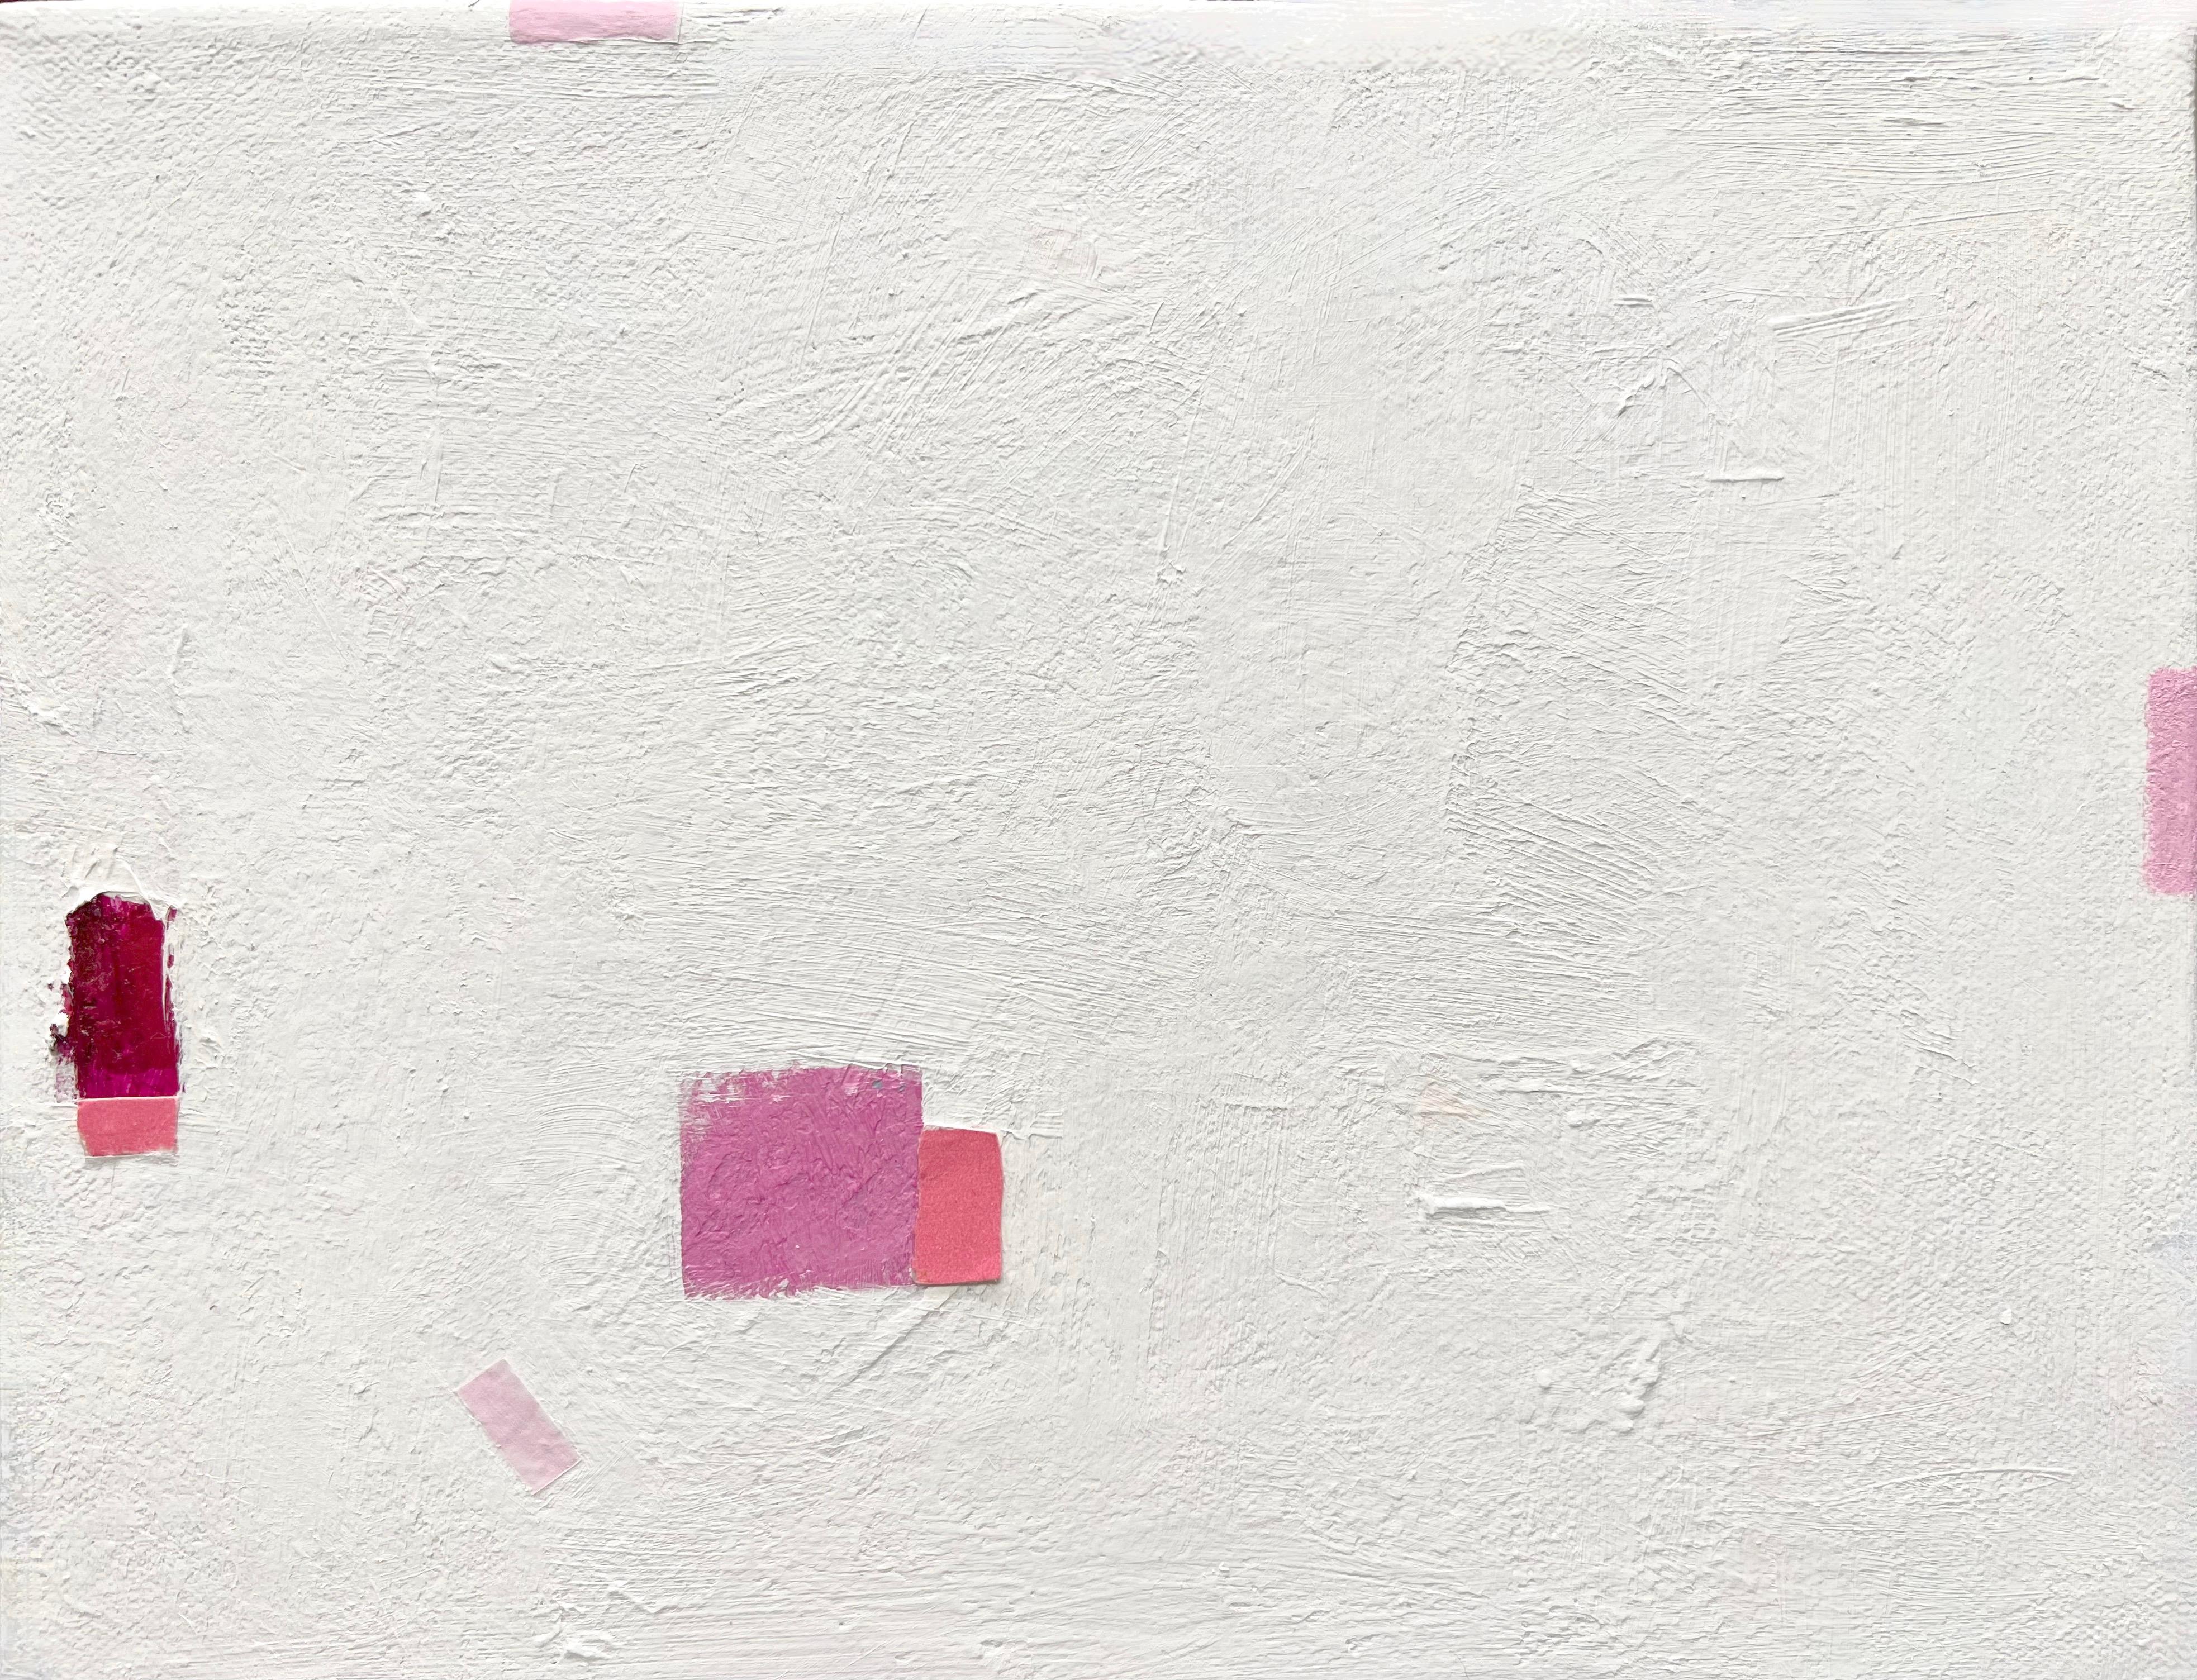 So little with so much to say. This pink and white abstract puts emphasis on simplified composition with the use of paint and paper collage. Heavy layers of paint build up a rough textured surface adding character to the minimalistic artwork. Small